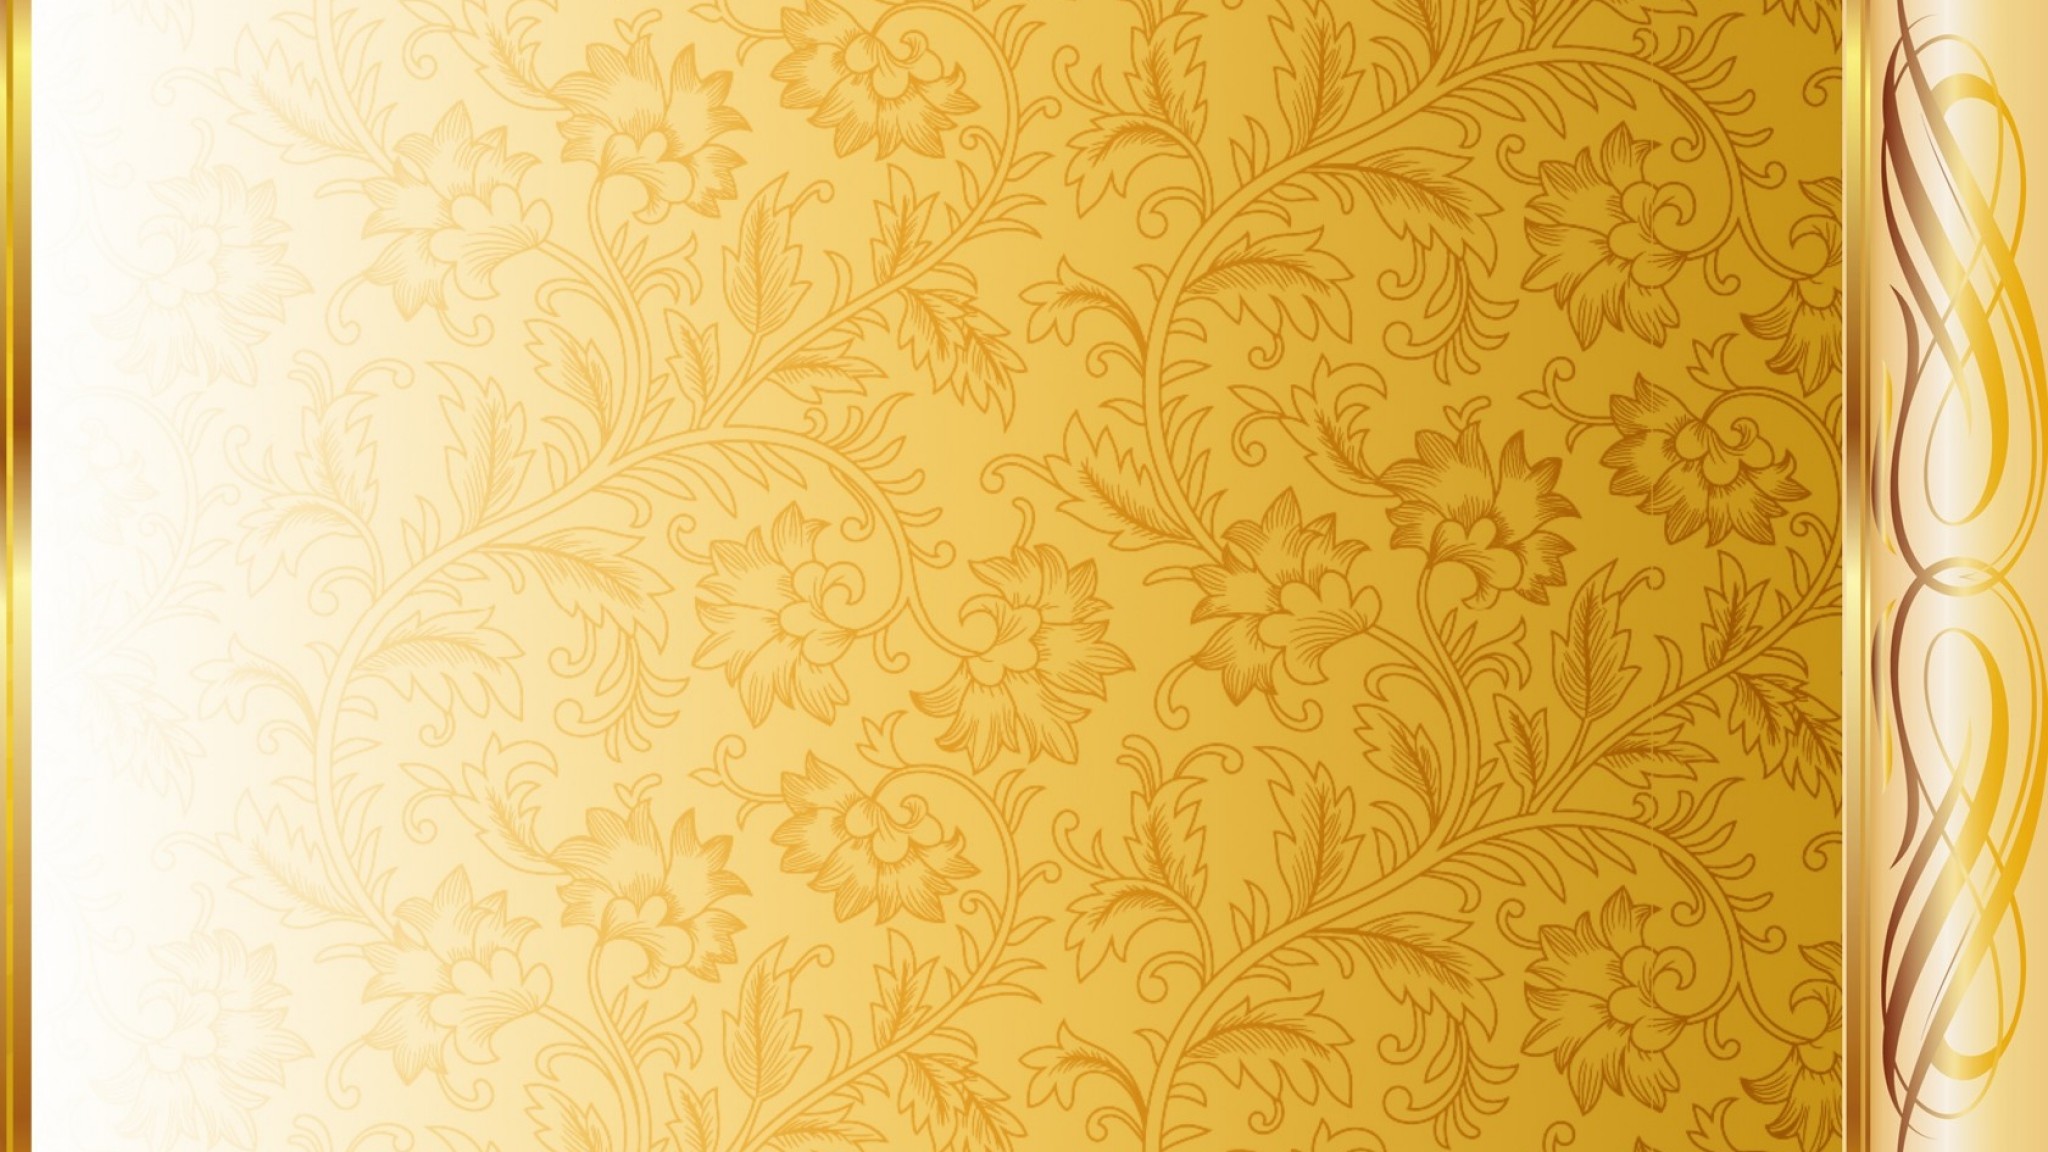 Gold Abstract Wallpaper (66+ images)